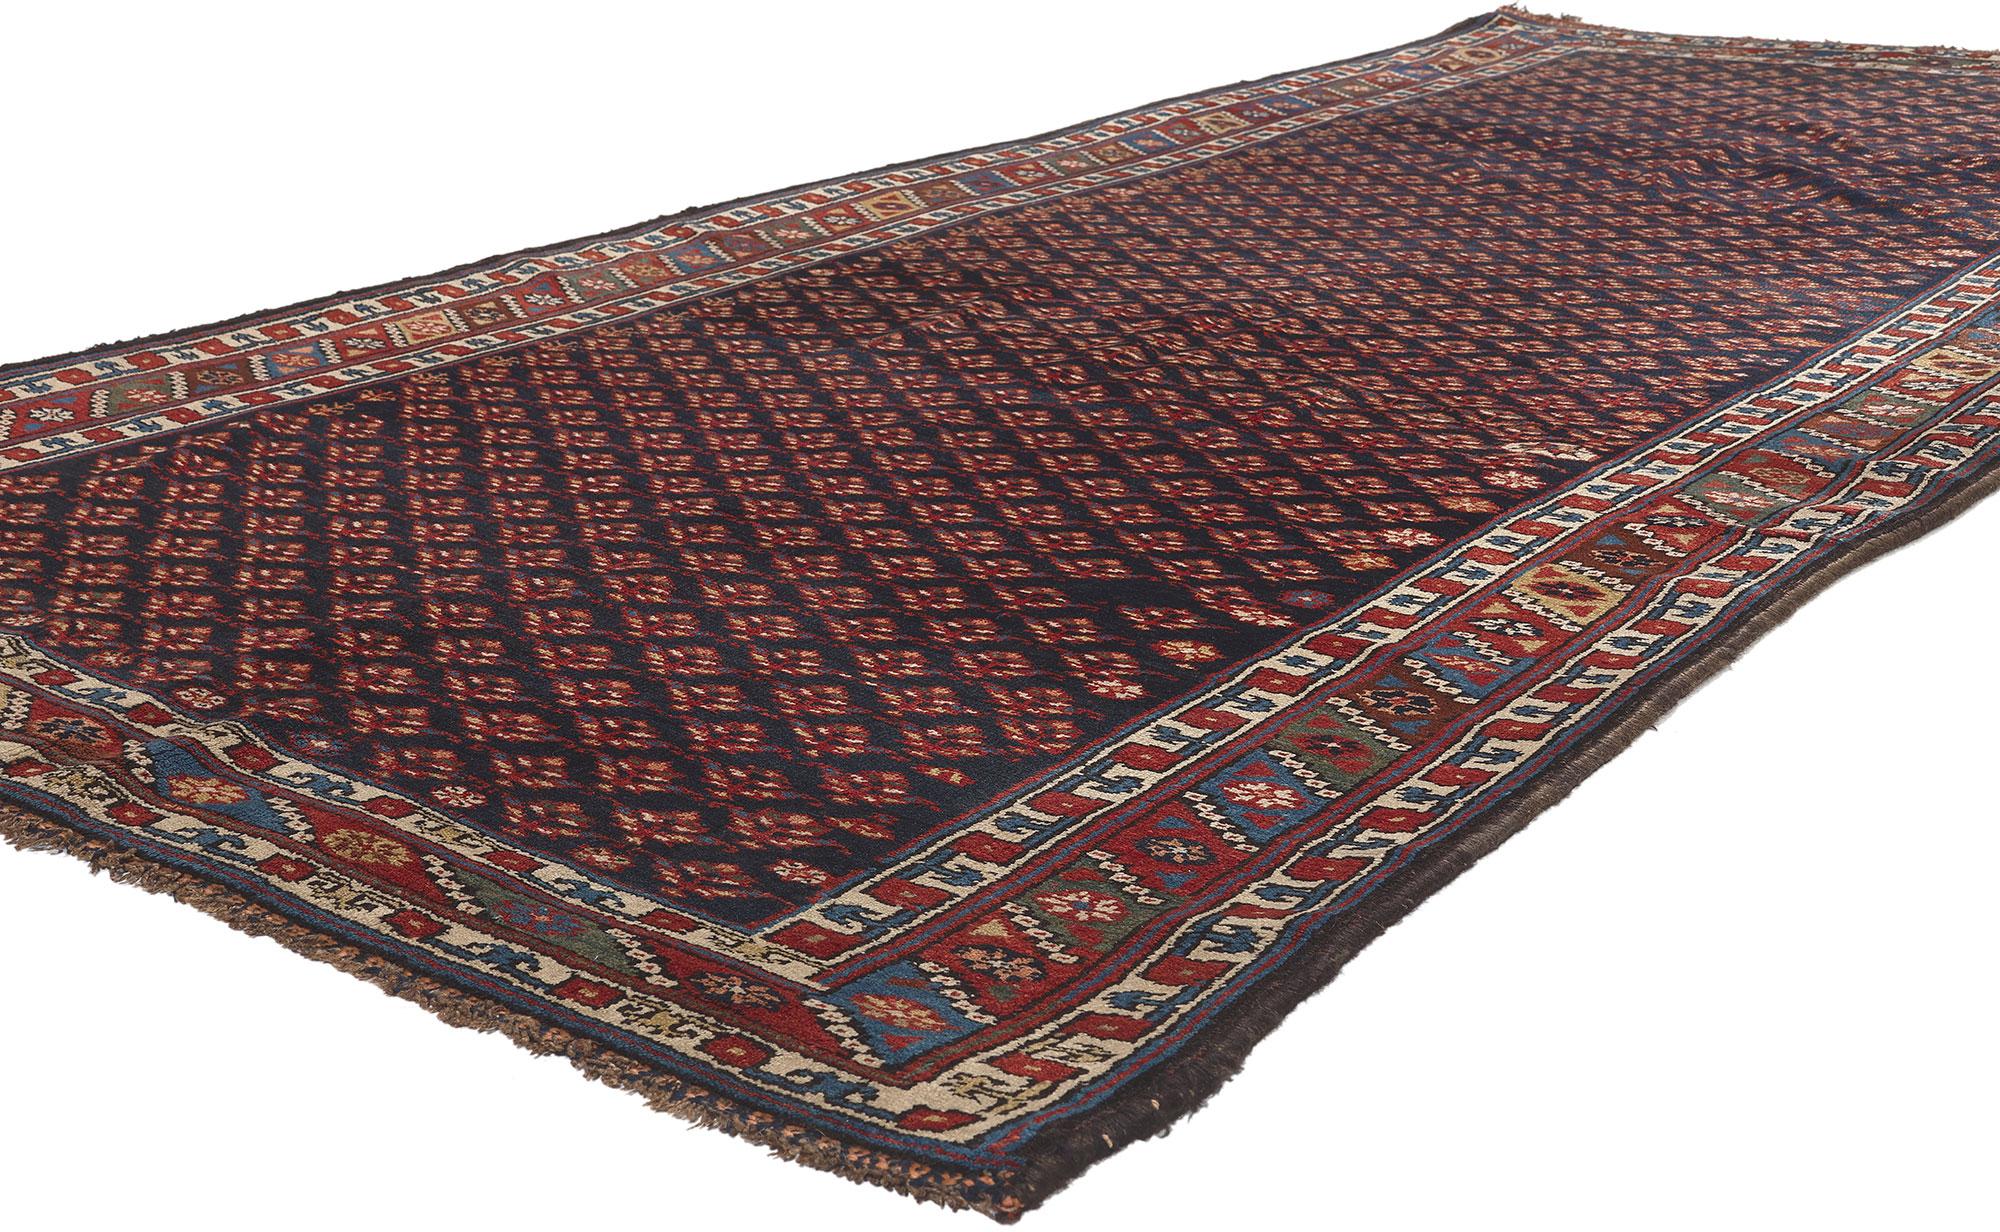 73305 Antique Caucasian Lori Kurdish Rug, 04'08 X 10'05.
Earth-tone elegance meets masculine appeal in this antique Caucasian Lori Kurdish rug. The floral design and earthy hues woven into this piece work together creating a warm and inviting